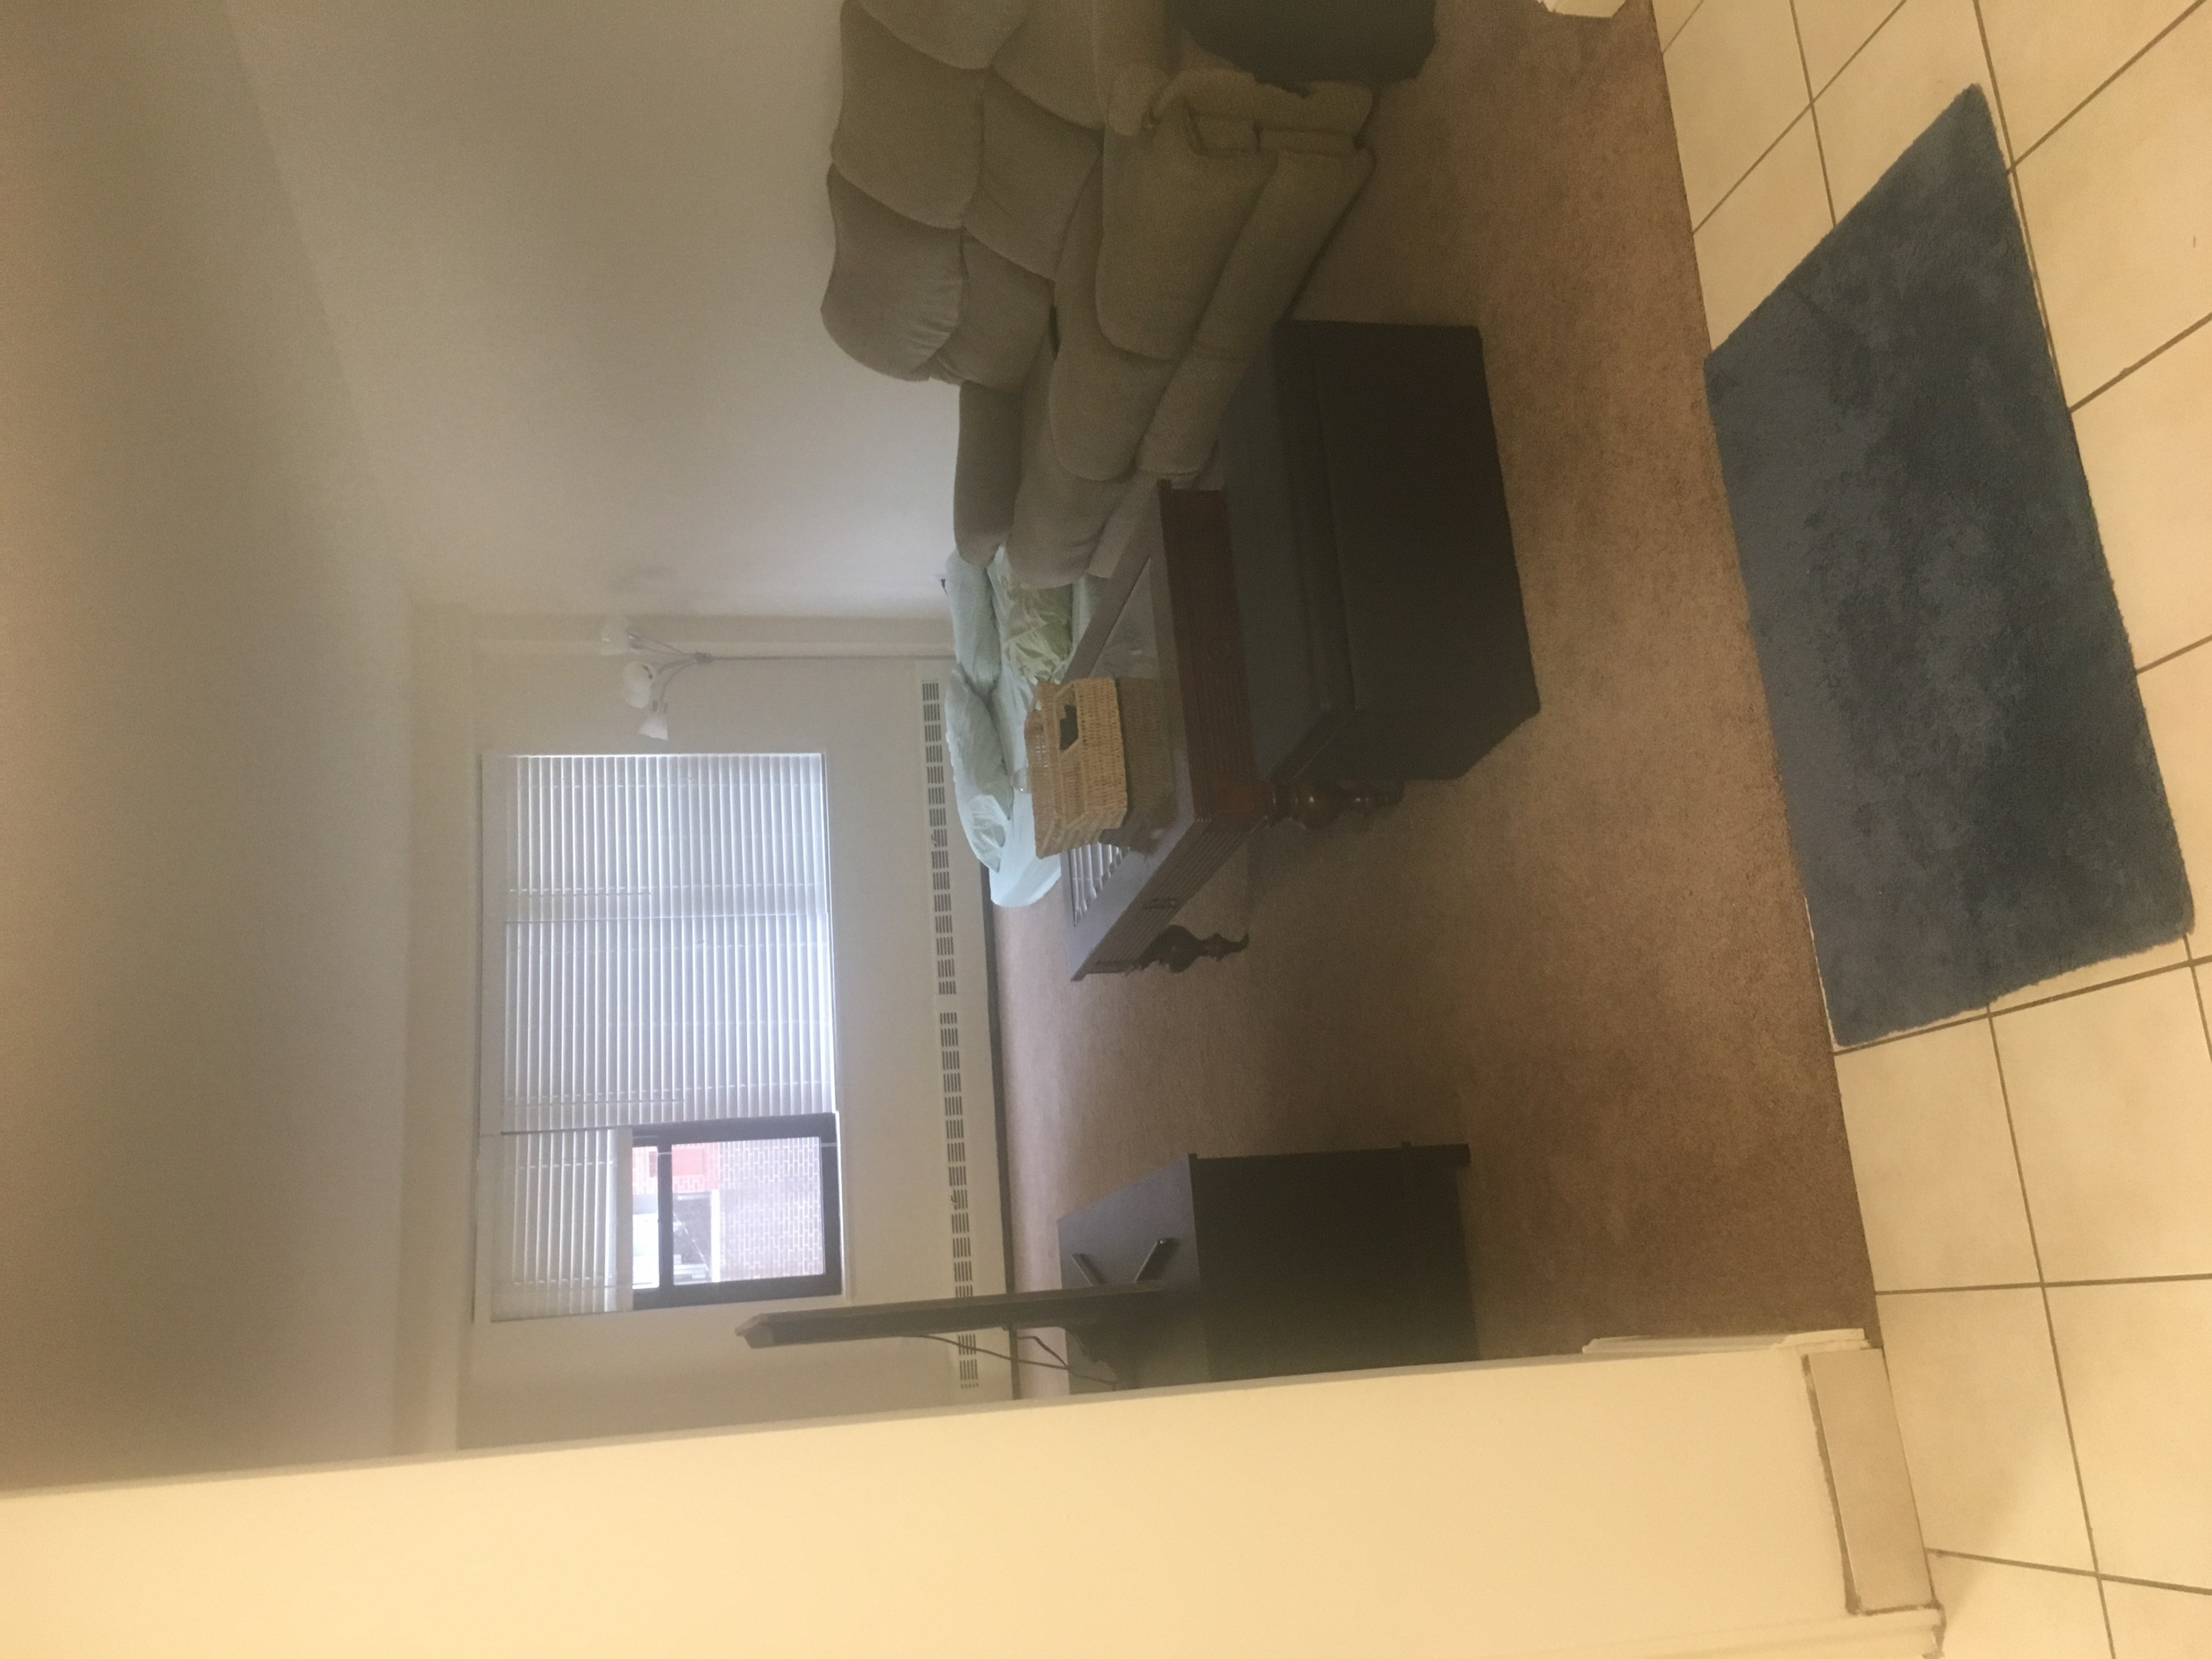 1 Bedroom Apartment For Rent In Stamford Ct 1 Bhk Apartments And Flats In Stamford Ct 1190696 Sulekha Rentals